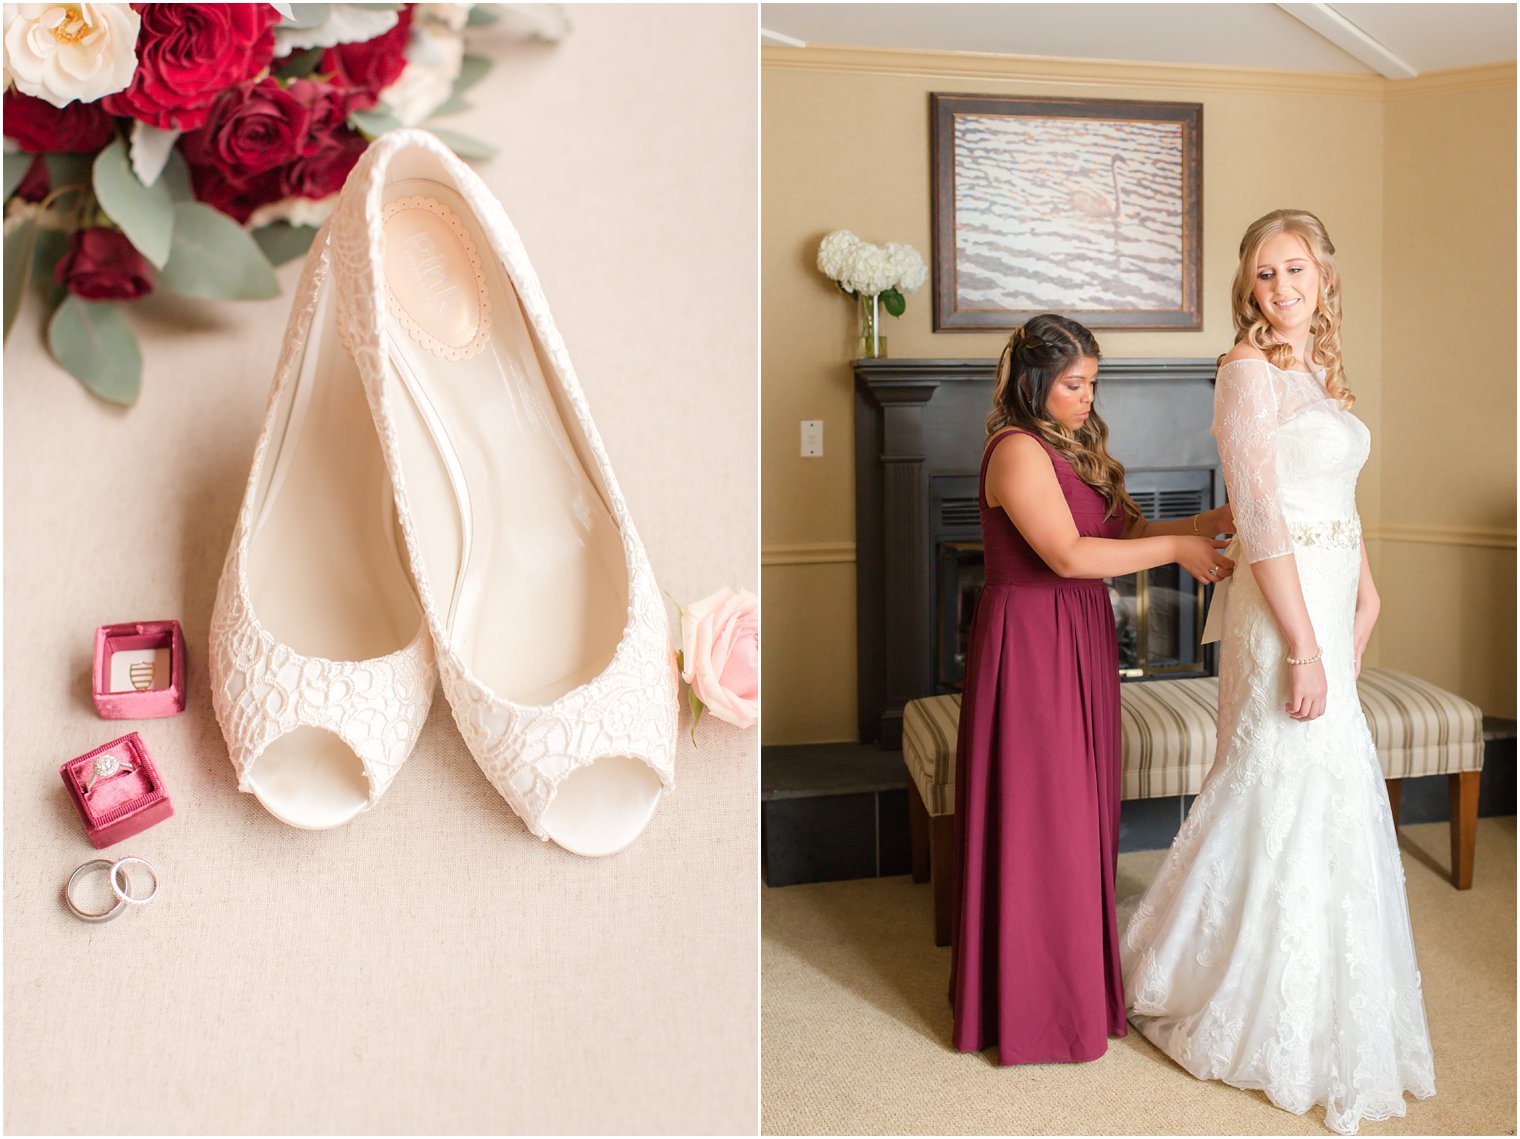 Bride's shoes during getting ready | Lambertville Station Inn Wedding Photos